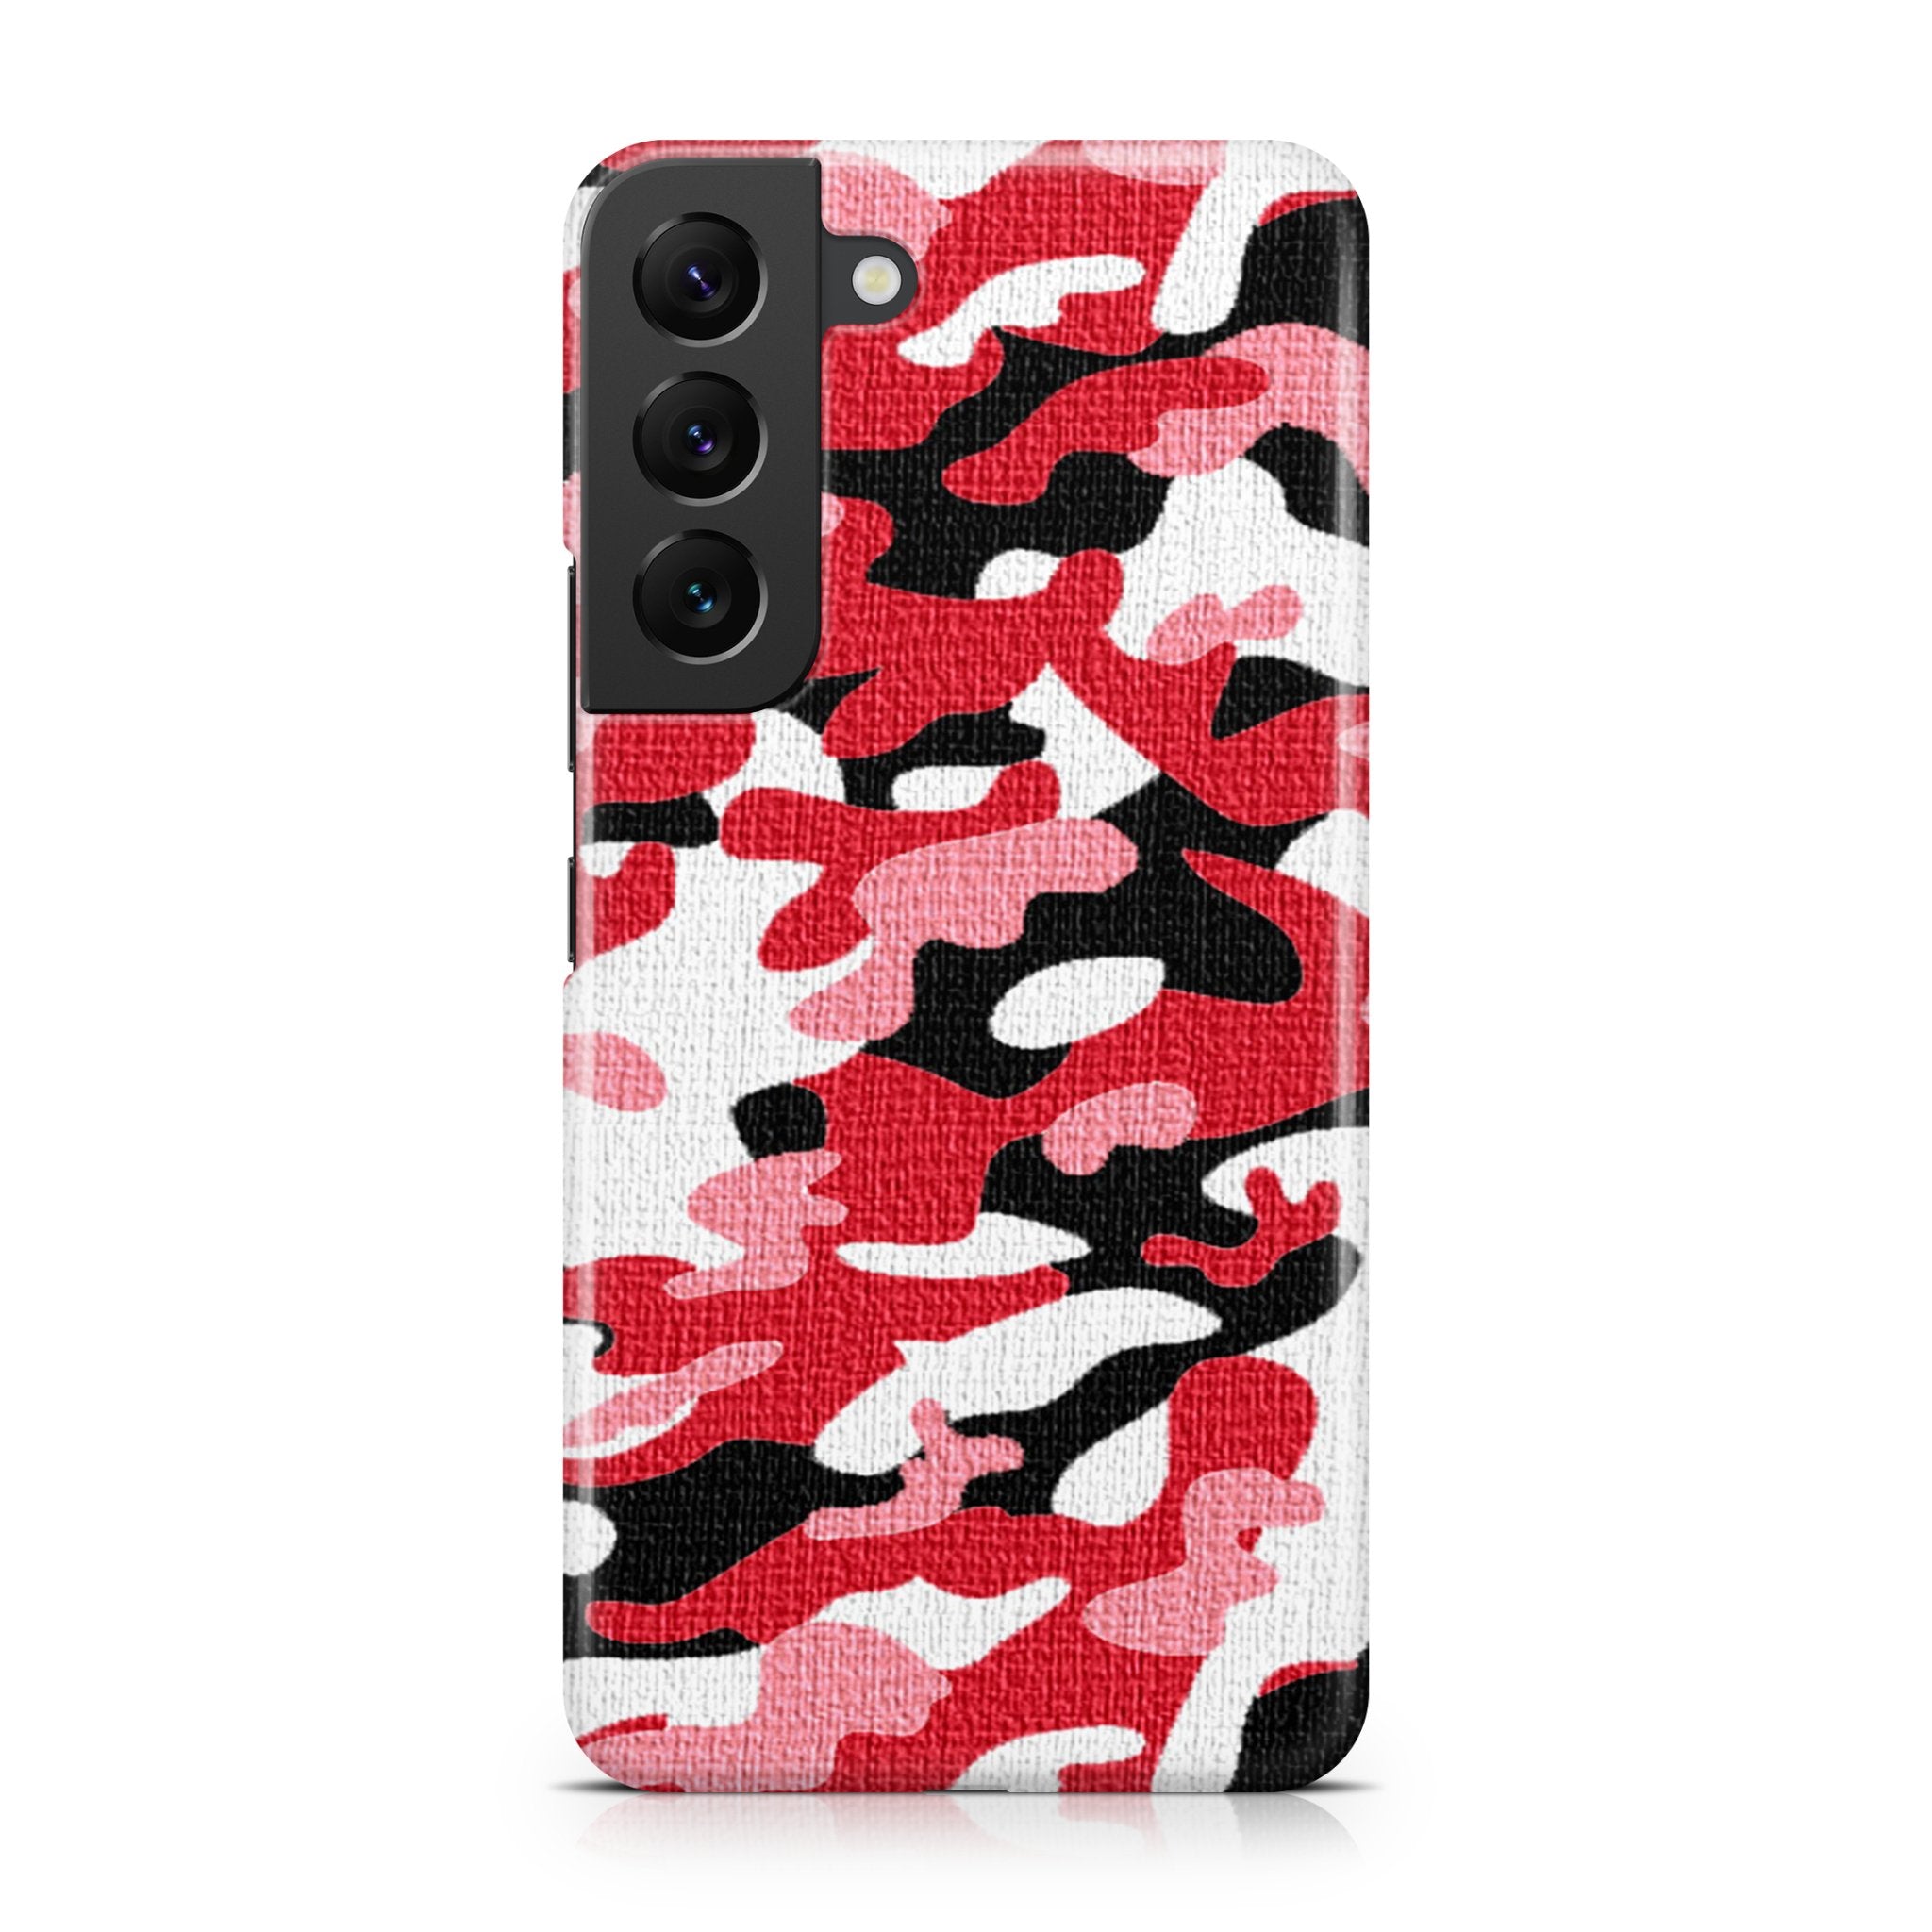 Red Camo - Samsung phone case designs by CaseSwagger